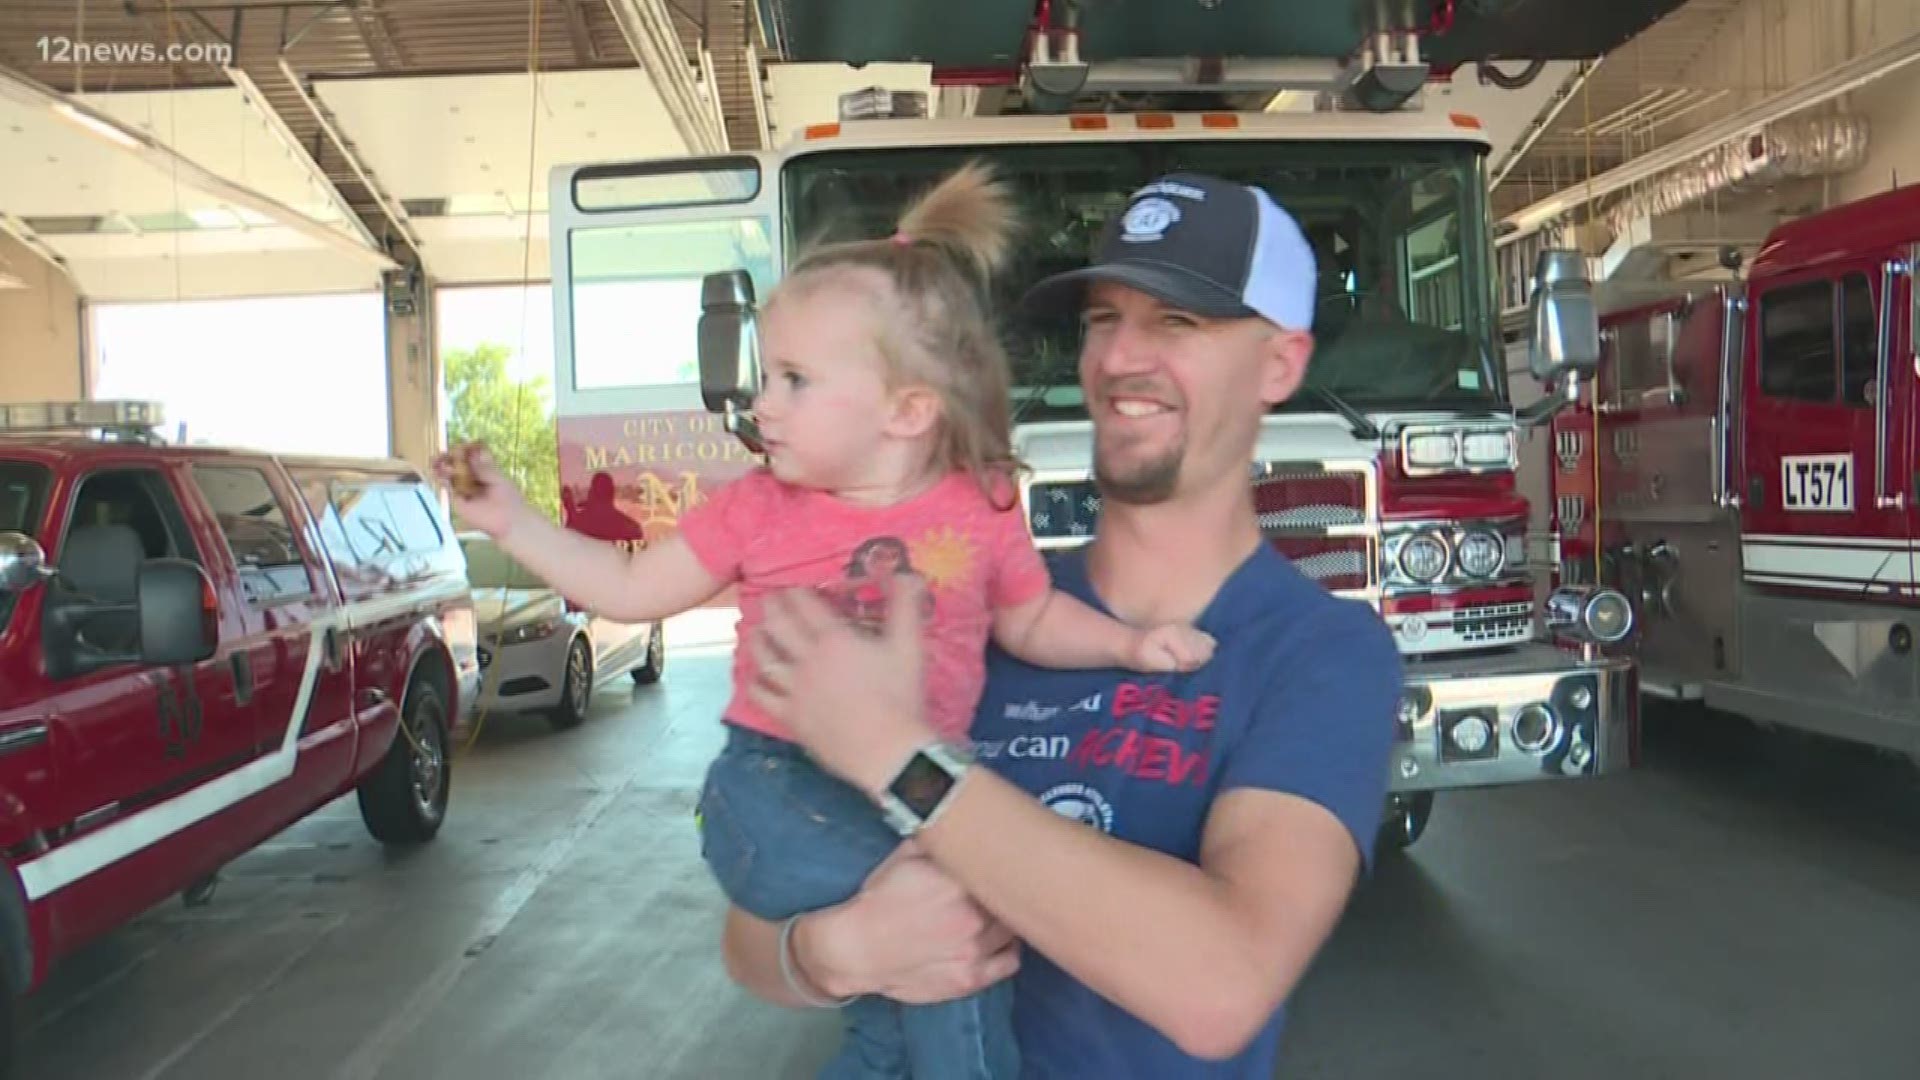 About 2 weeks ago Katie was pulled from a pool, lifeless, but the quick thinking and CPR performed by her babysitter and the Maricopa first responders saved her life